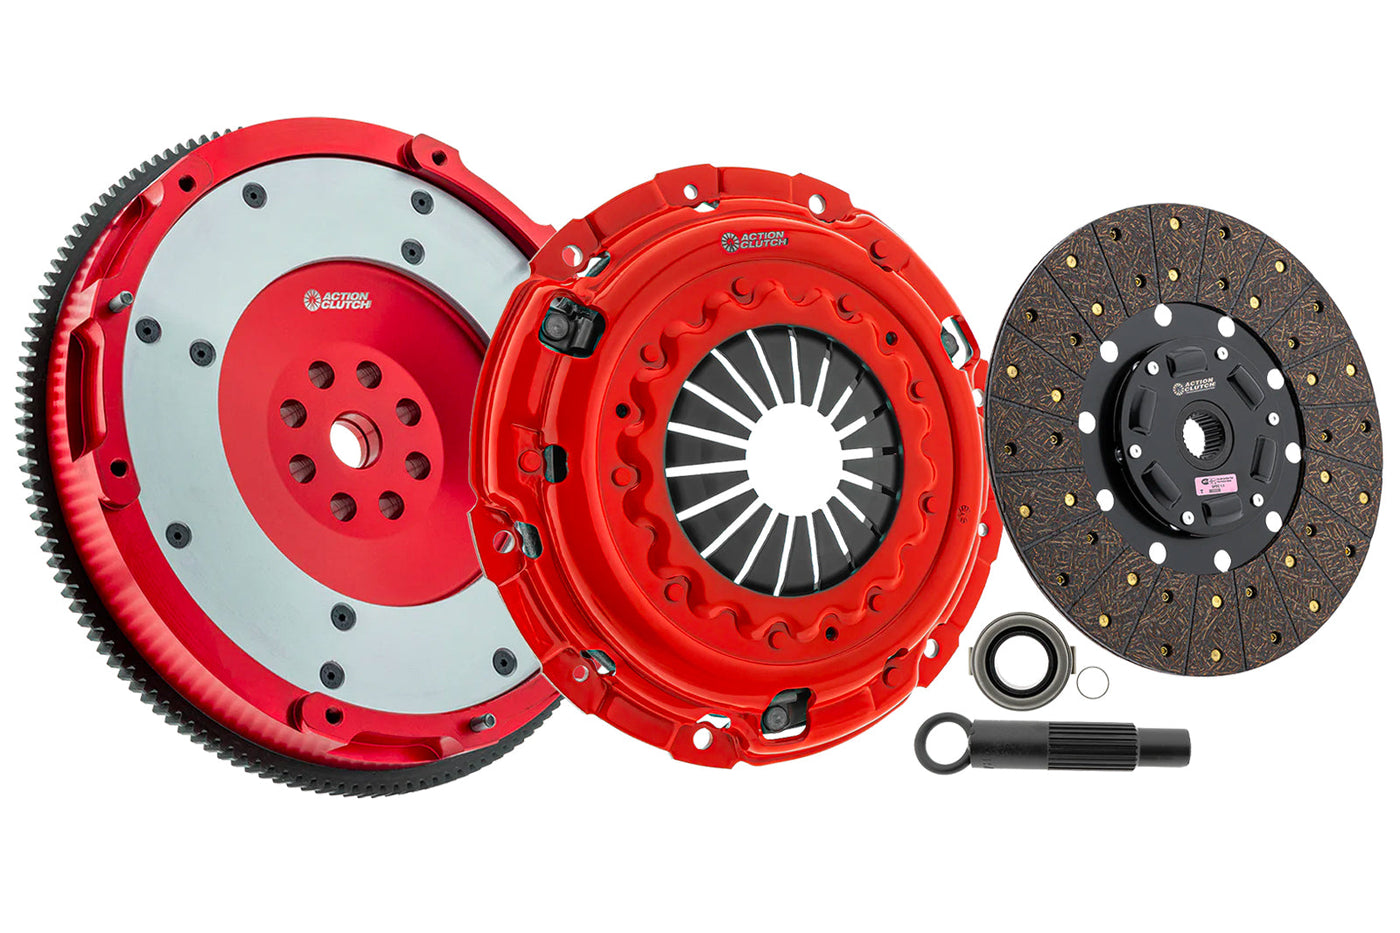 Stage 1 Clutch Kit (1OS) for Acura Integra 2023 1.5L (L15CA) Turbo Includes Aluminum Lightweight Flywheel